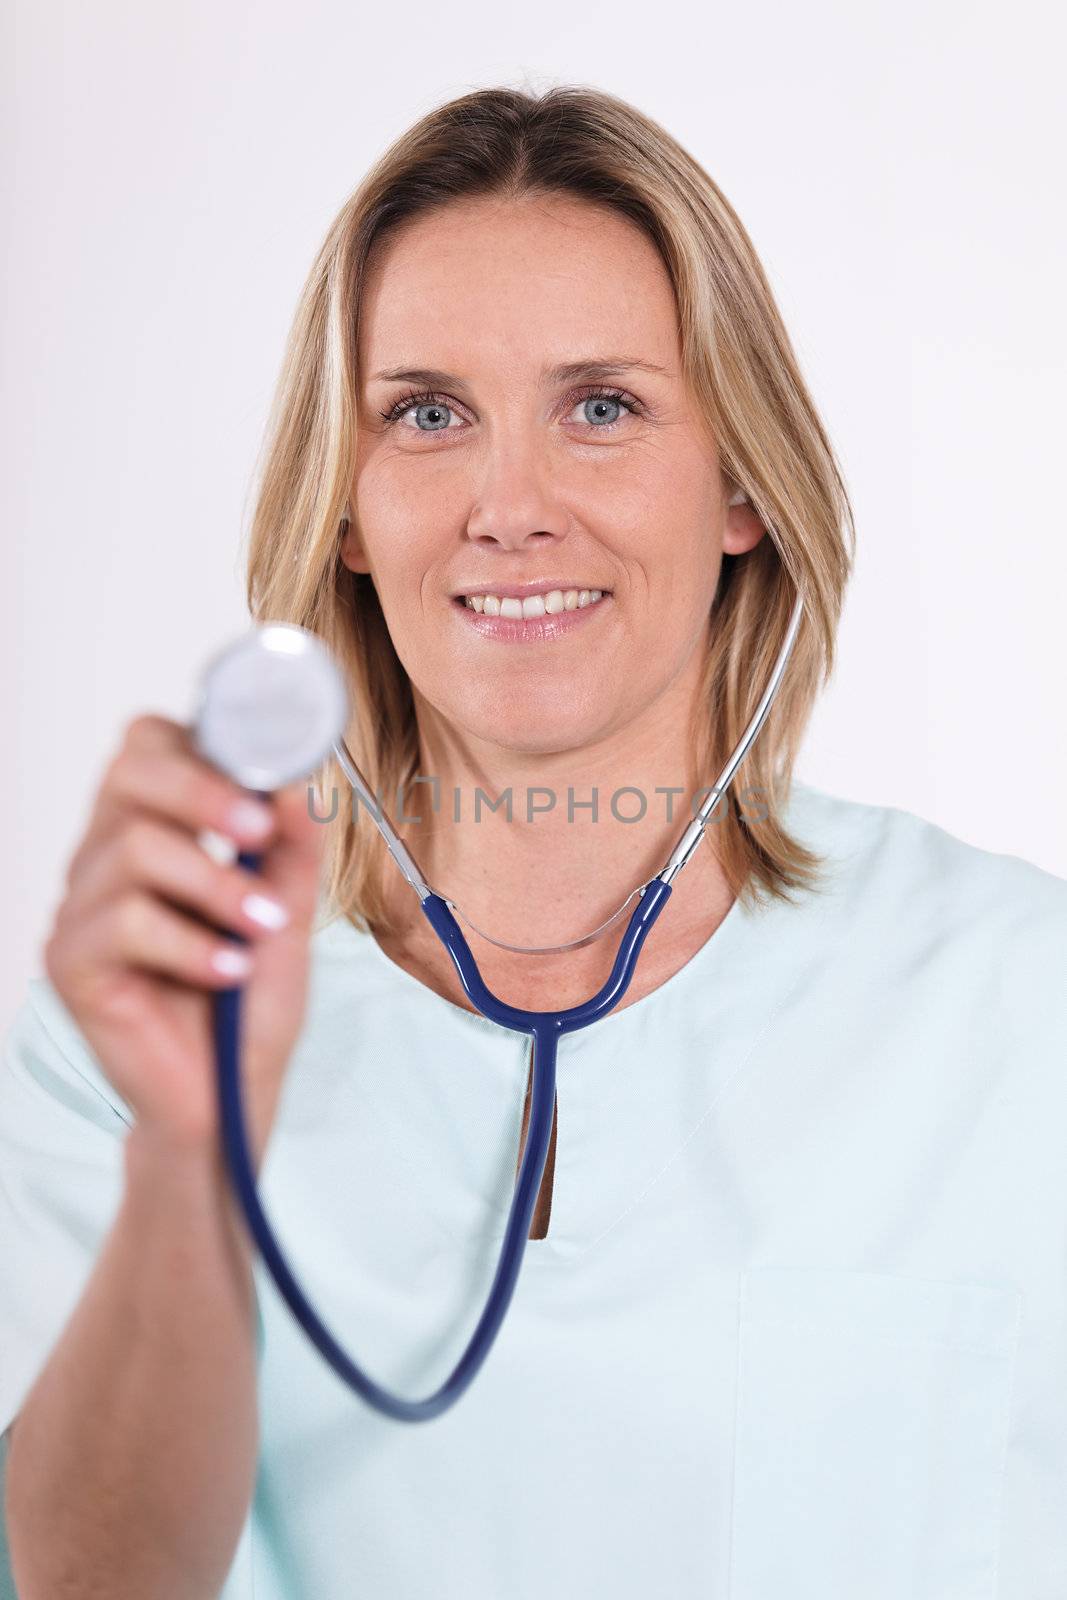 doctor and stethoscope by vwalakte